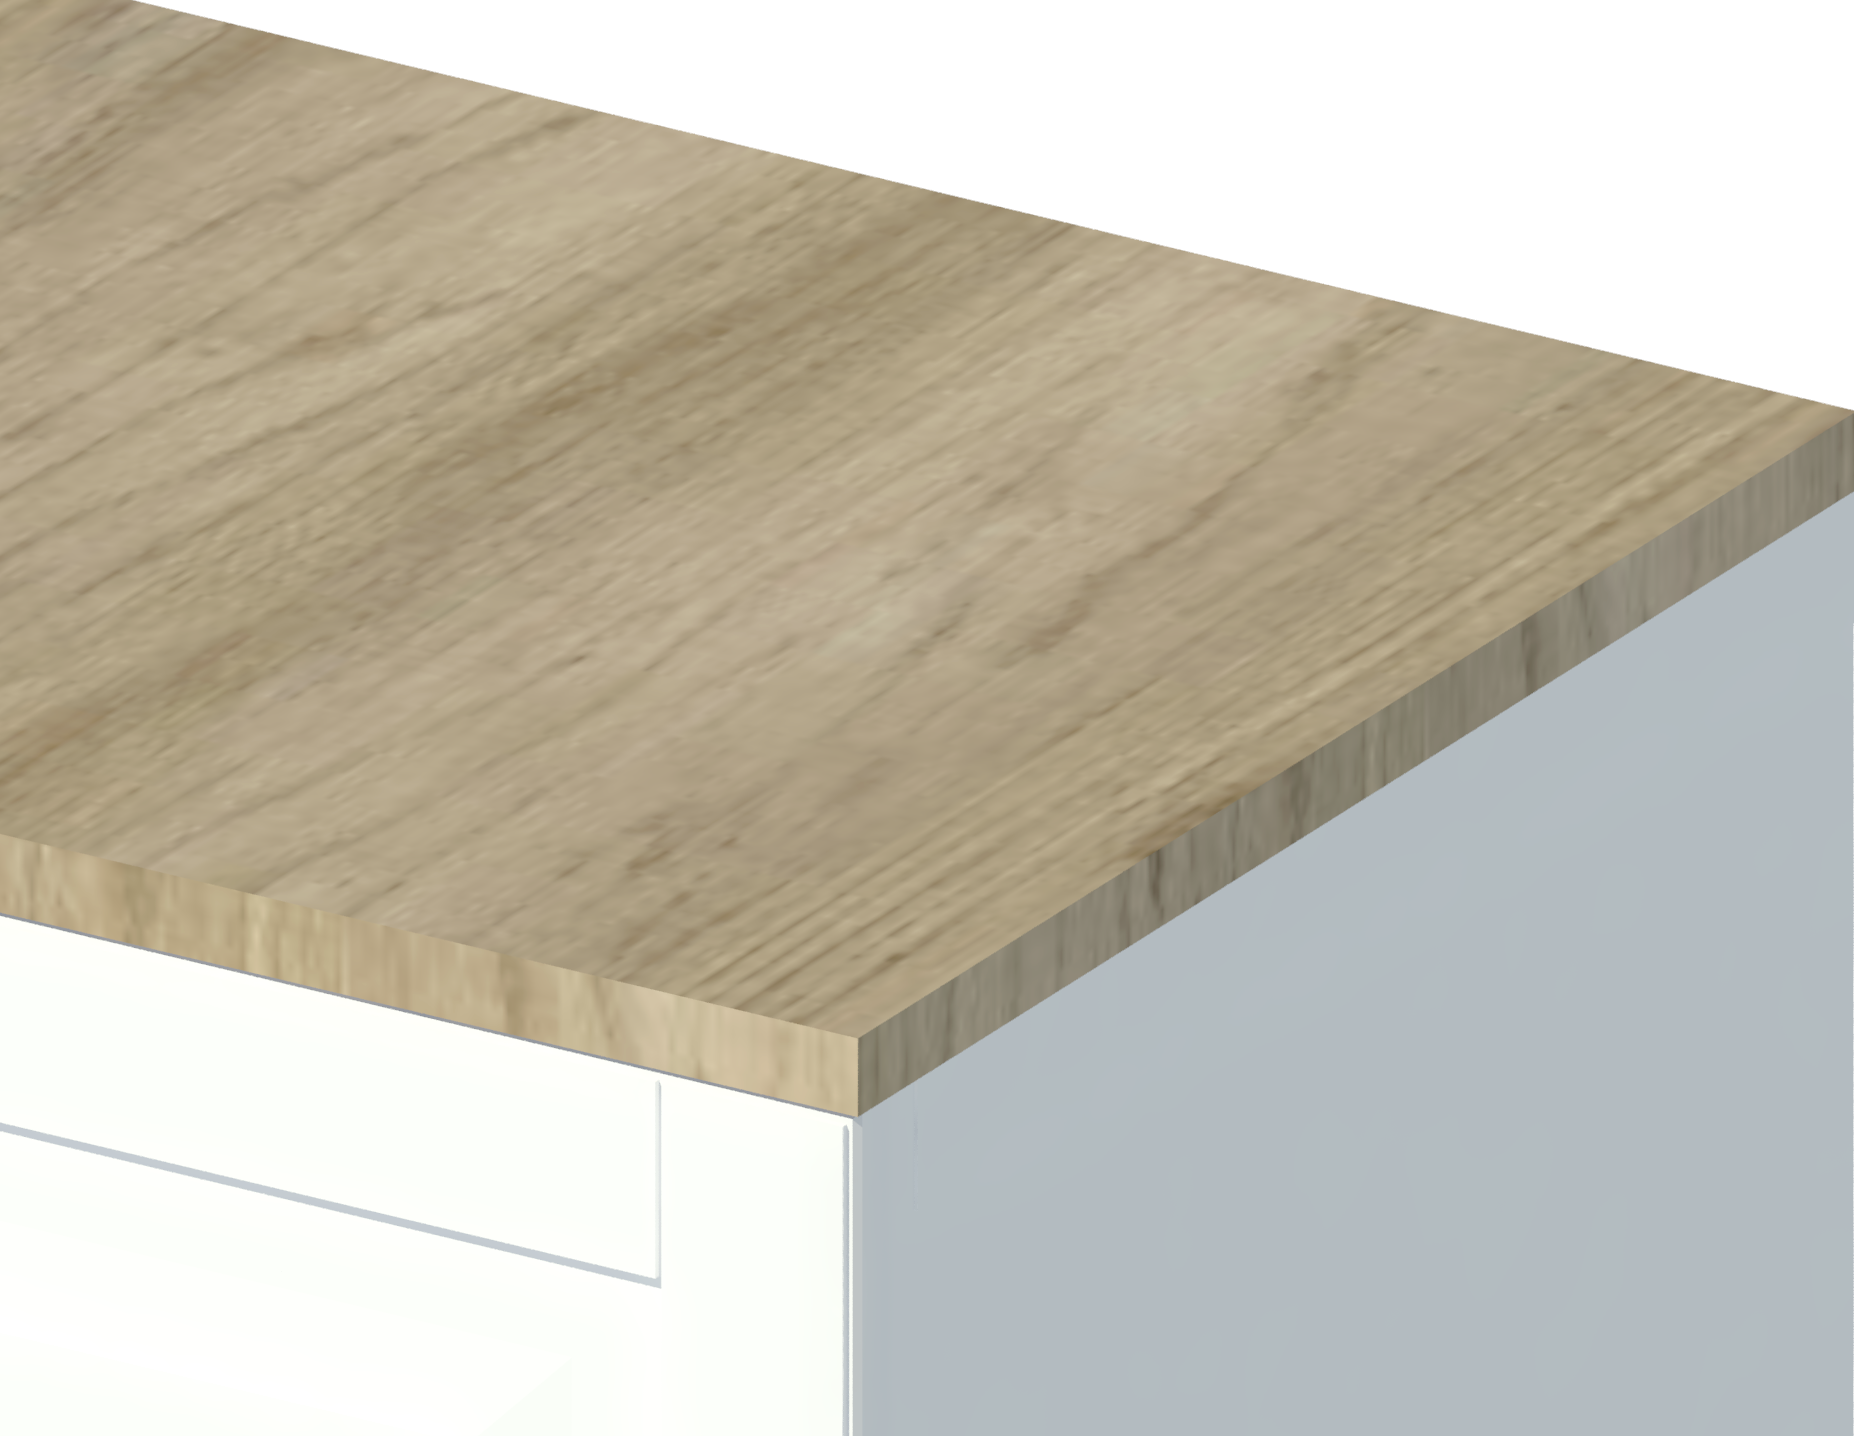 Revit render of the oak top panel to place on top of the cabinet.